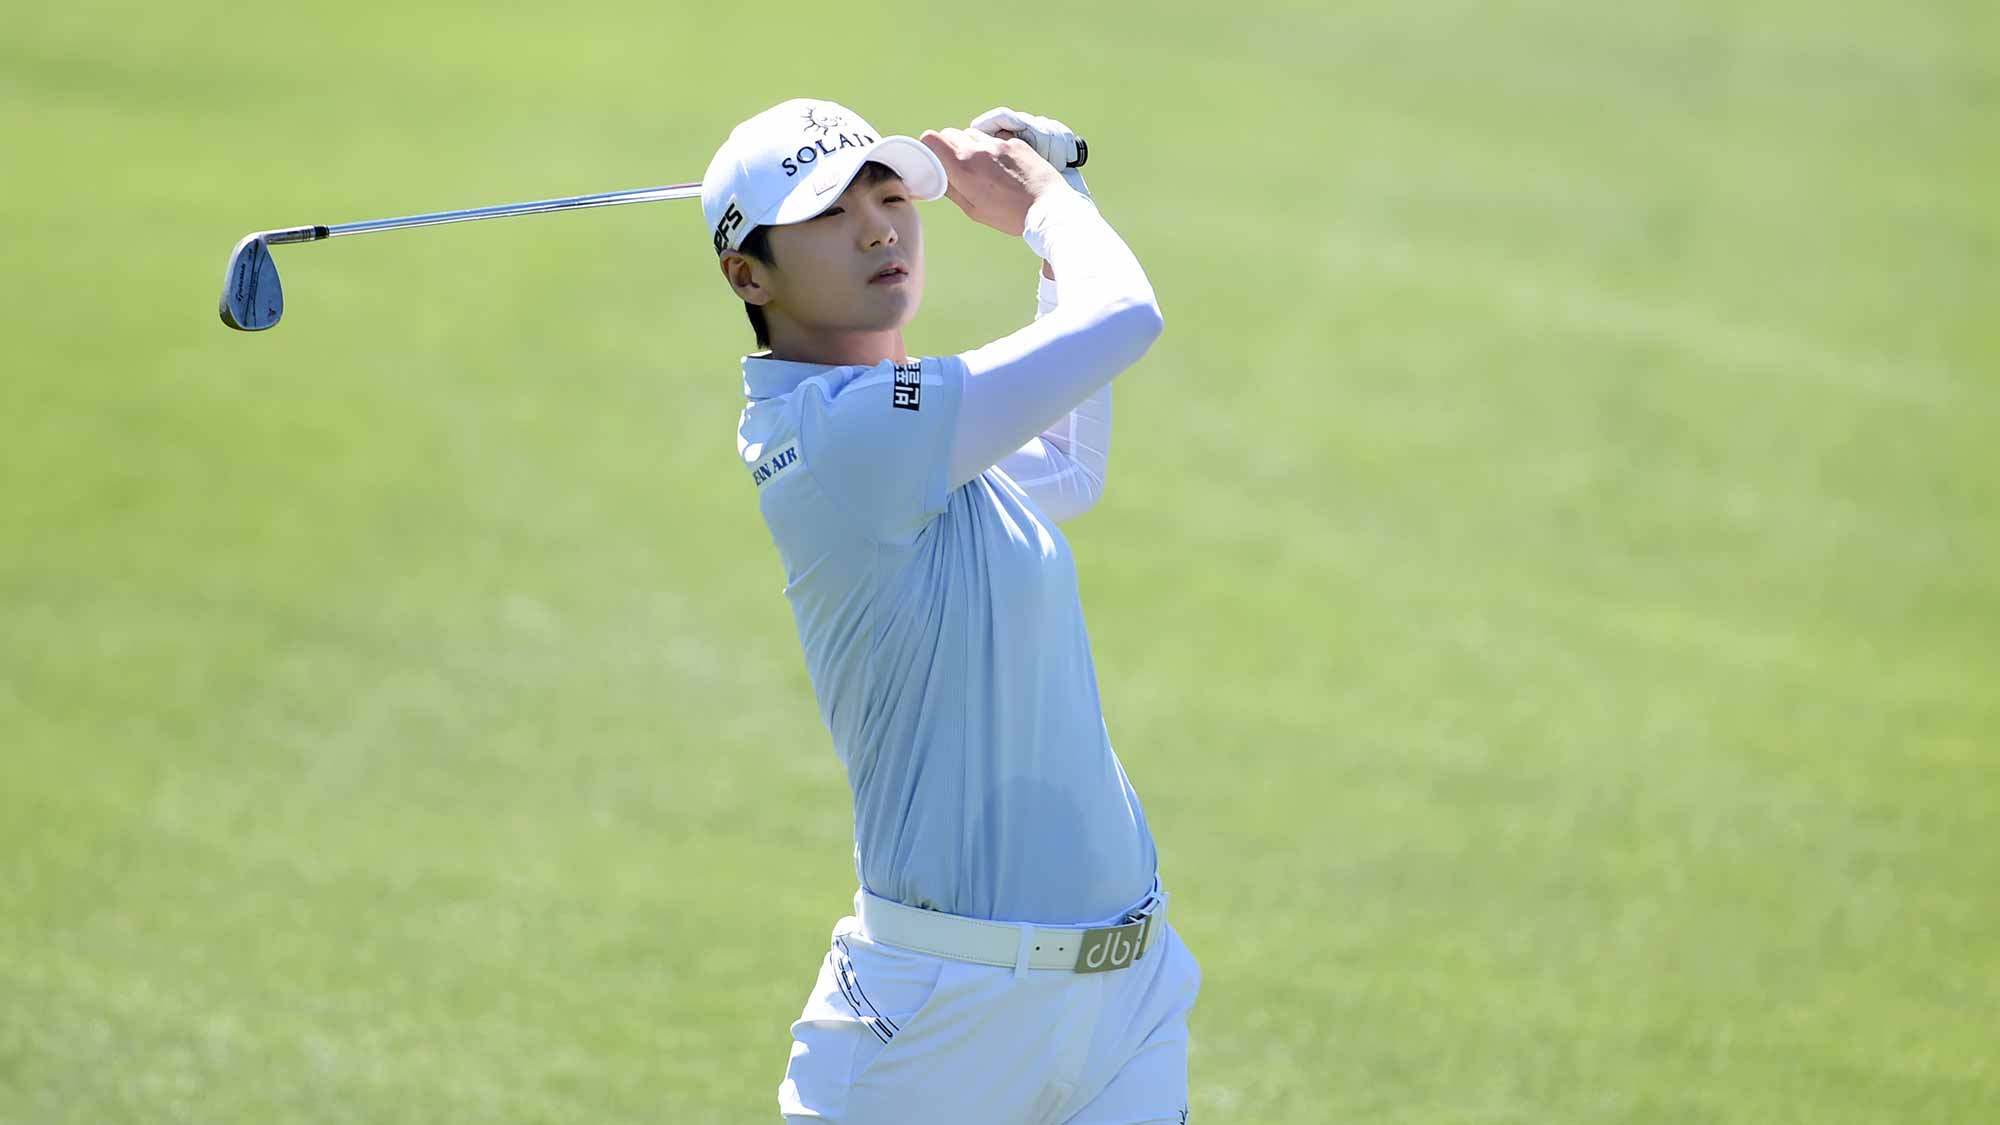 Sung Hyun Park of Korea hits her tee approach on the third hole during the second round of the Bank Of Hope Founders Cup at the Wildfire Golf Club on March 22, 2019 in Phoenix, Arizona